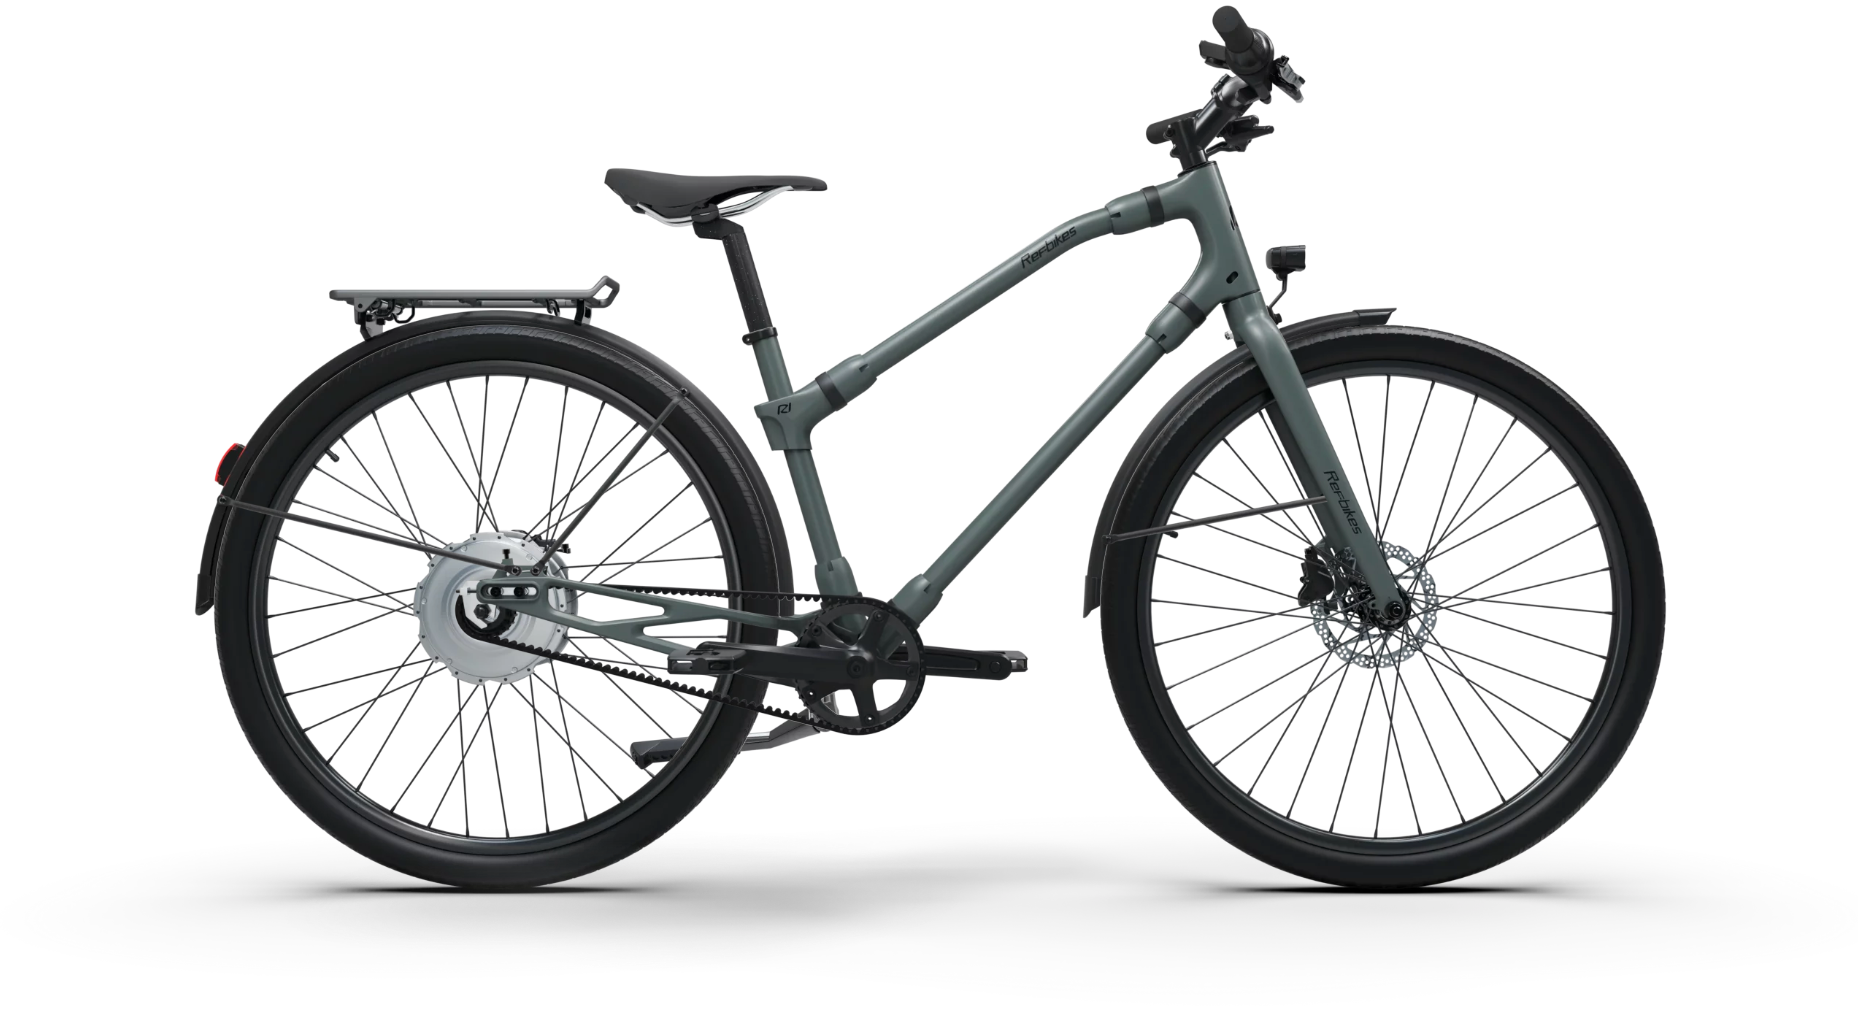 Ref Urban Boost bike in muted sage green, featuring eco-friendly design and electric pedal assist.